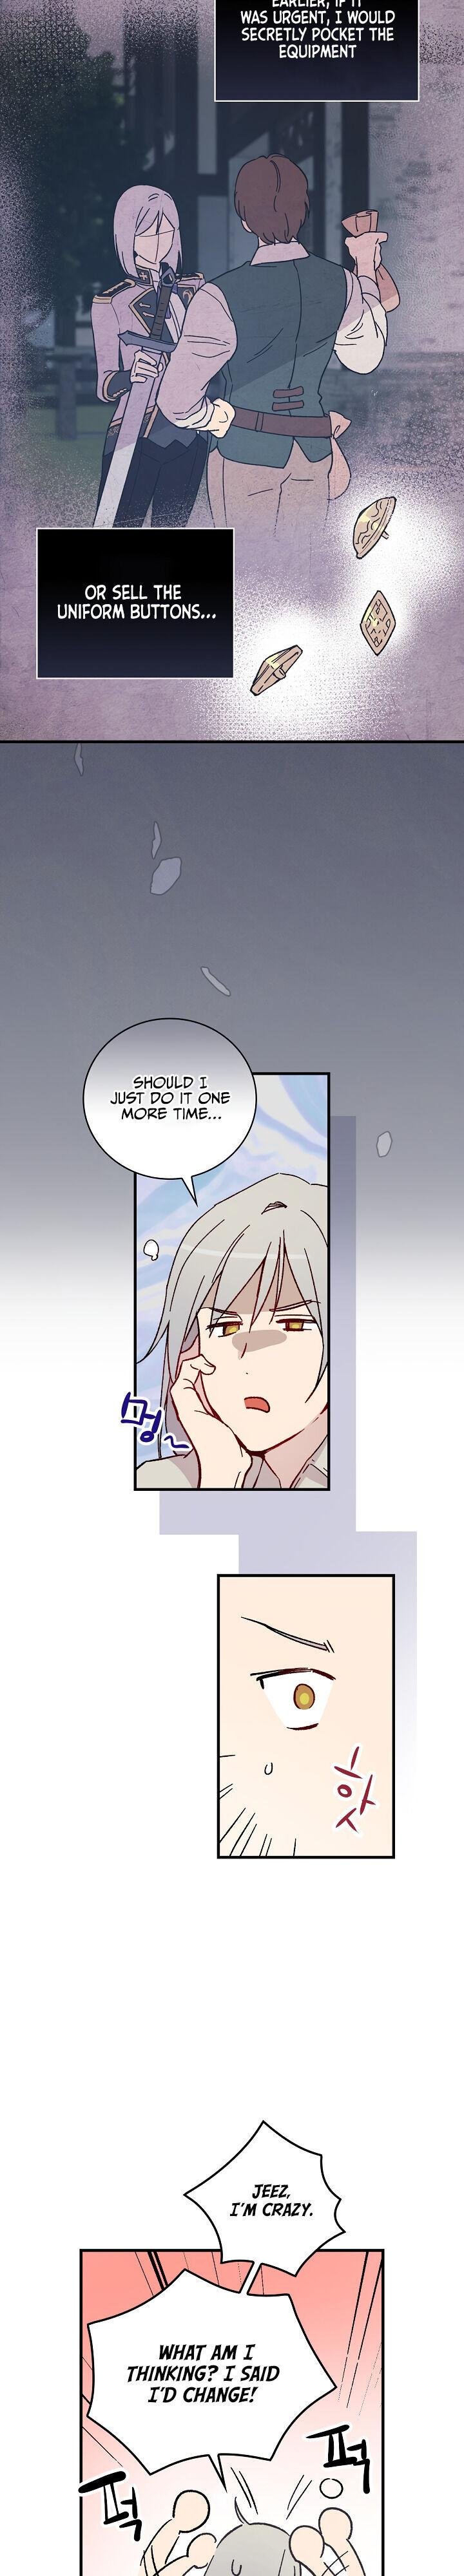 a-red-knight-does-not-blindly-follow-money-chap-3-2